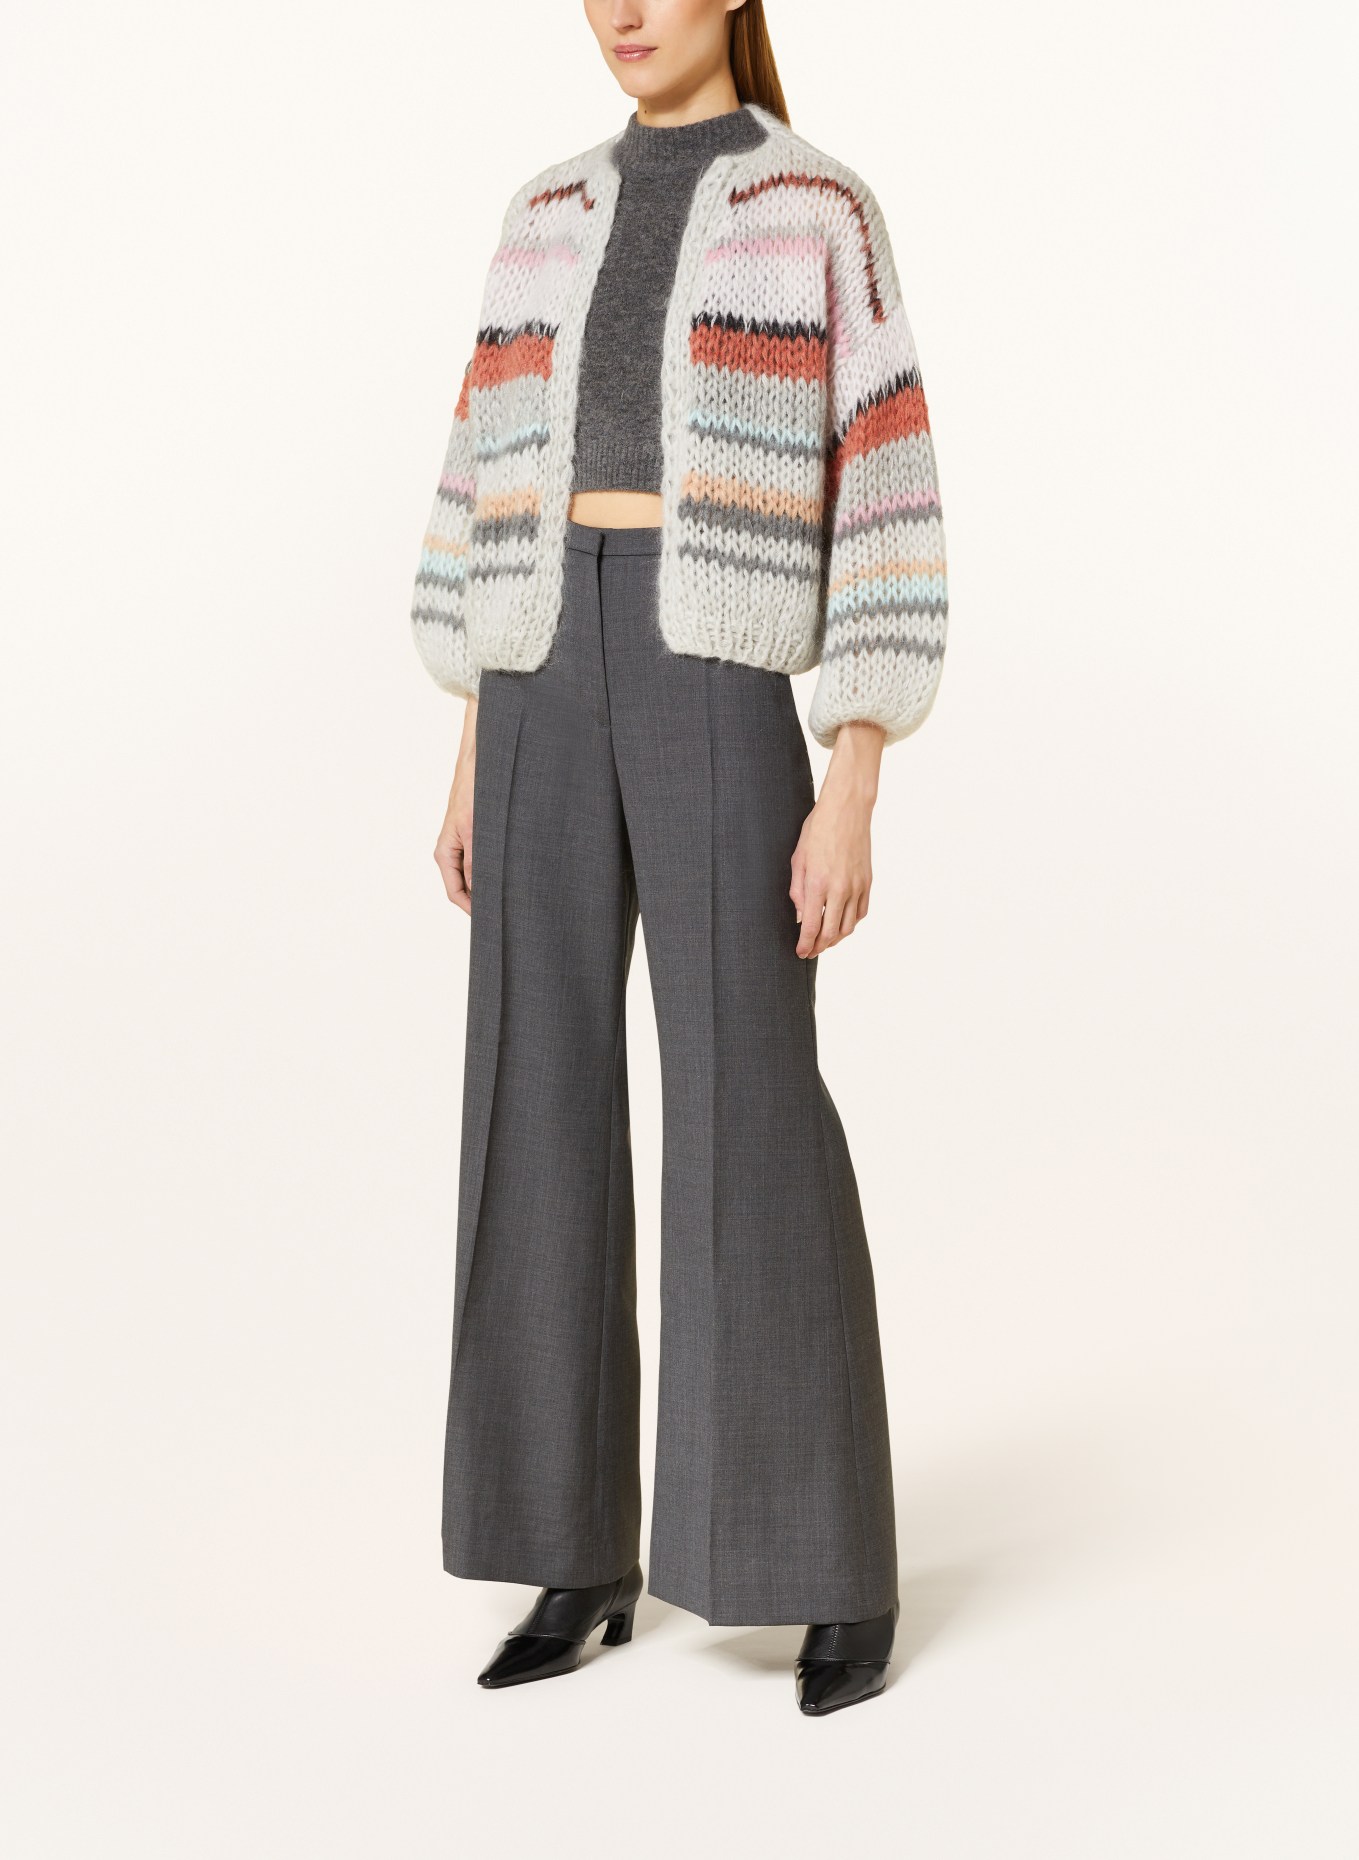 MAIAMI Oversized knit cardigan with mohair, Color: GRAY/ LIGHT PINK/ BROWN (Image 2)